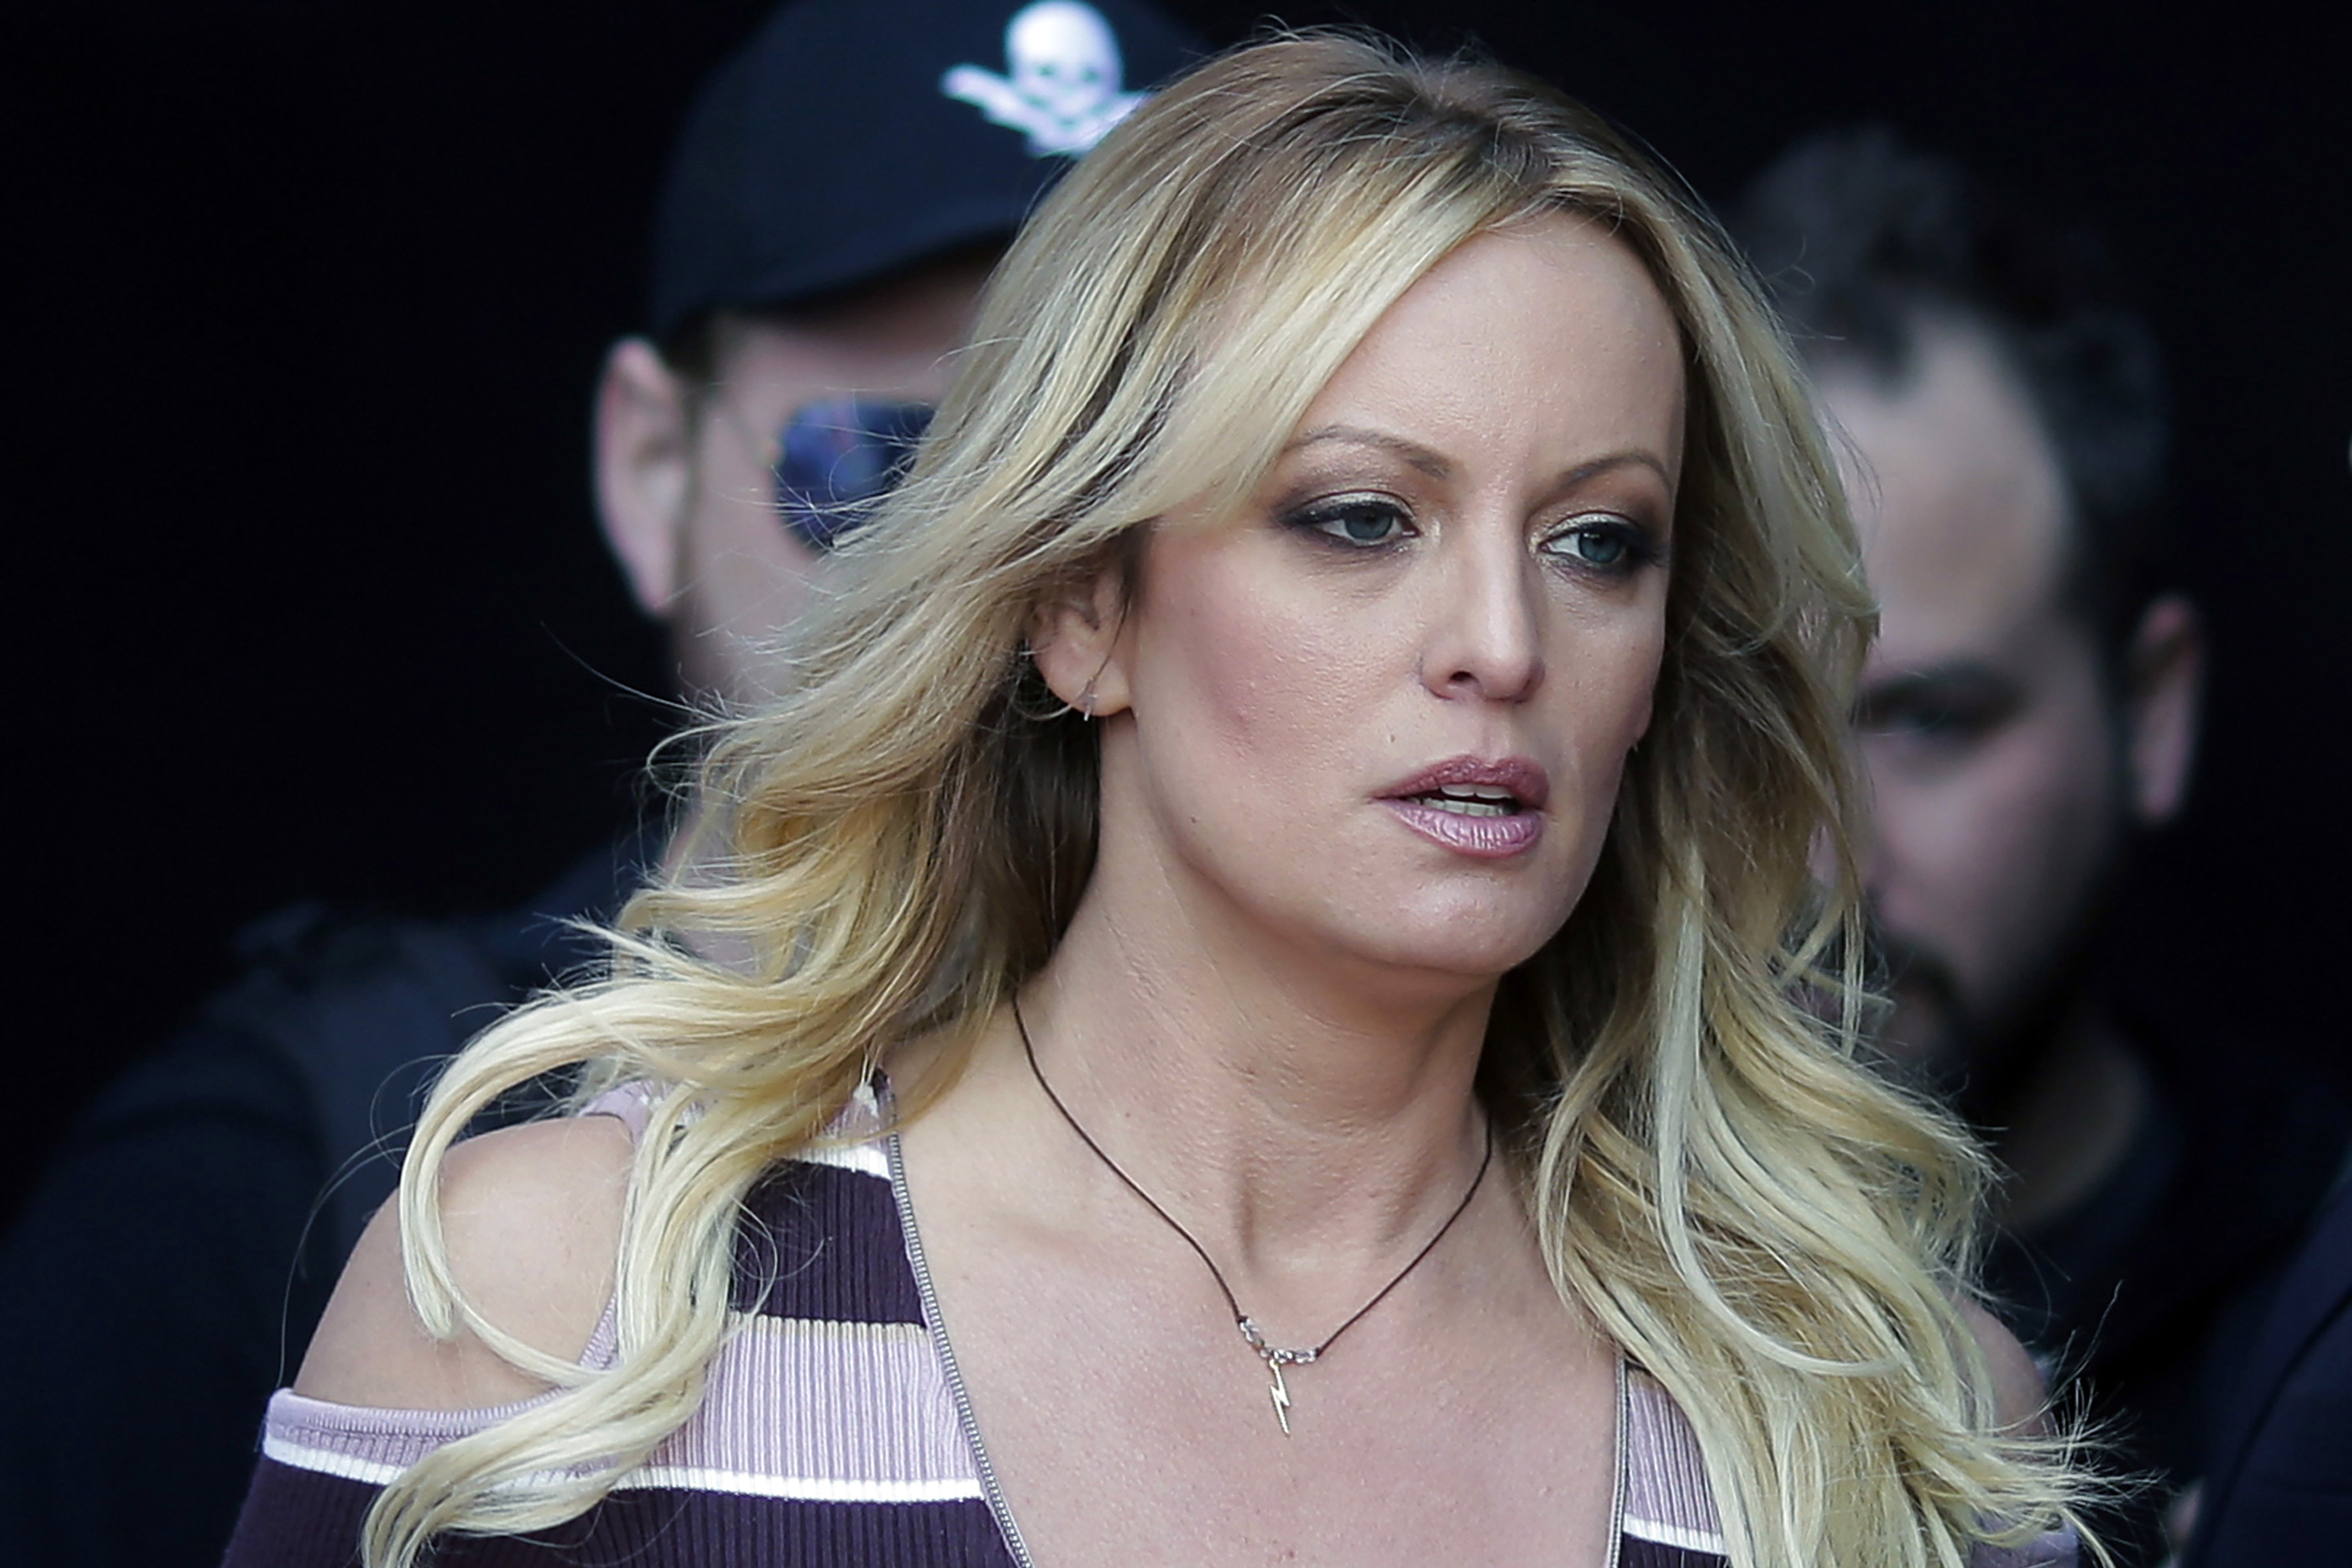 Stormy Daniels arrives at an event in Berlin, on Oct. 11, 2018. The porn actor was called as...